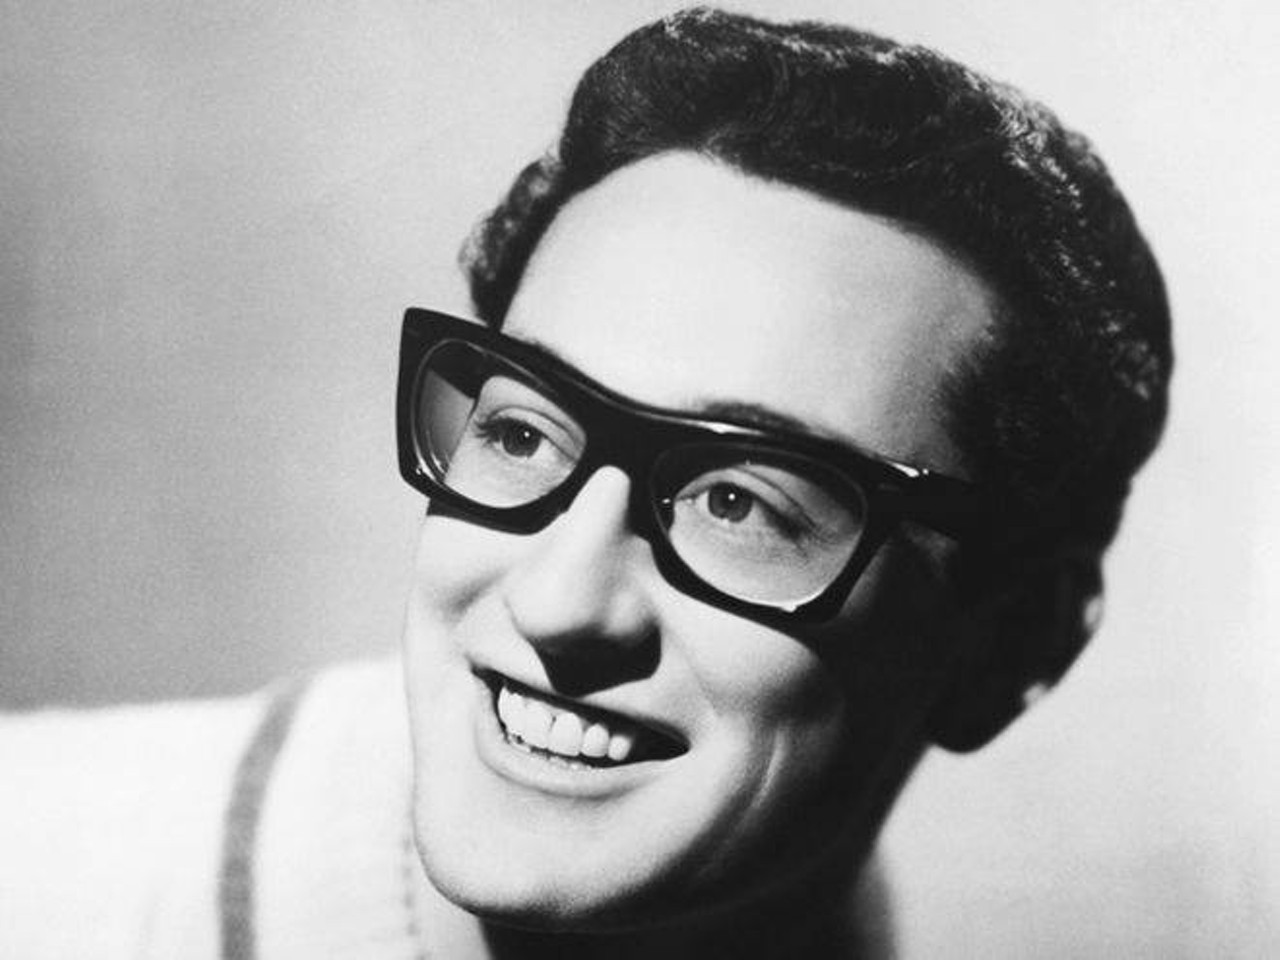 Buddy Holly
Though he led an incredibly short life, there is still too much importance and influence to be described here. Born in Lubbock during the Great Depression, Holly would eventually change the music scene, even though he died at age 22. After gaining popularity and opening for Elvis numerous times in the mid-50s with a friend and fellow musician, Bob Montgomery, Holly decided to pursue a serious career in music. During the mid- to late-50s, he and his band were credited with hits such as “That’ll be the Day,” “Rave On” and “Peggy Sue.” His death occurred in 1959 when he after a plane crash left no survivors. This event is now known as “the day the music died,” and is alluded to in Don McLeans’ song “American Pie.” He is buried in the City of Lubbock Cemetery.
Photo via Facebook / Buddy Holly